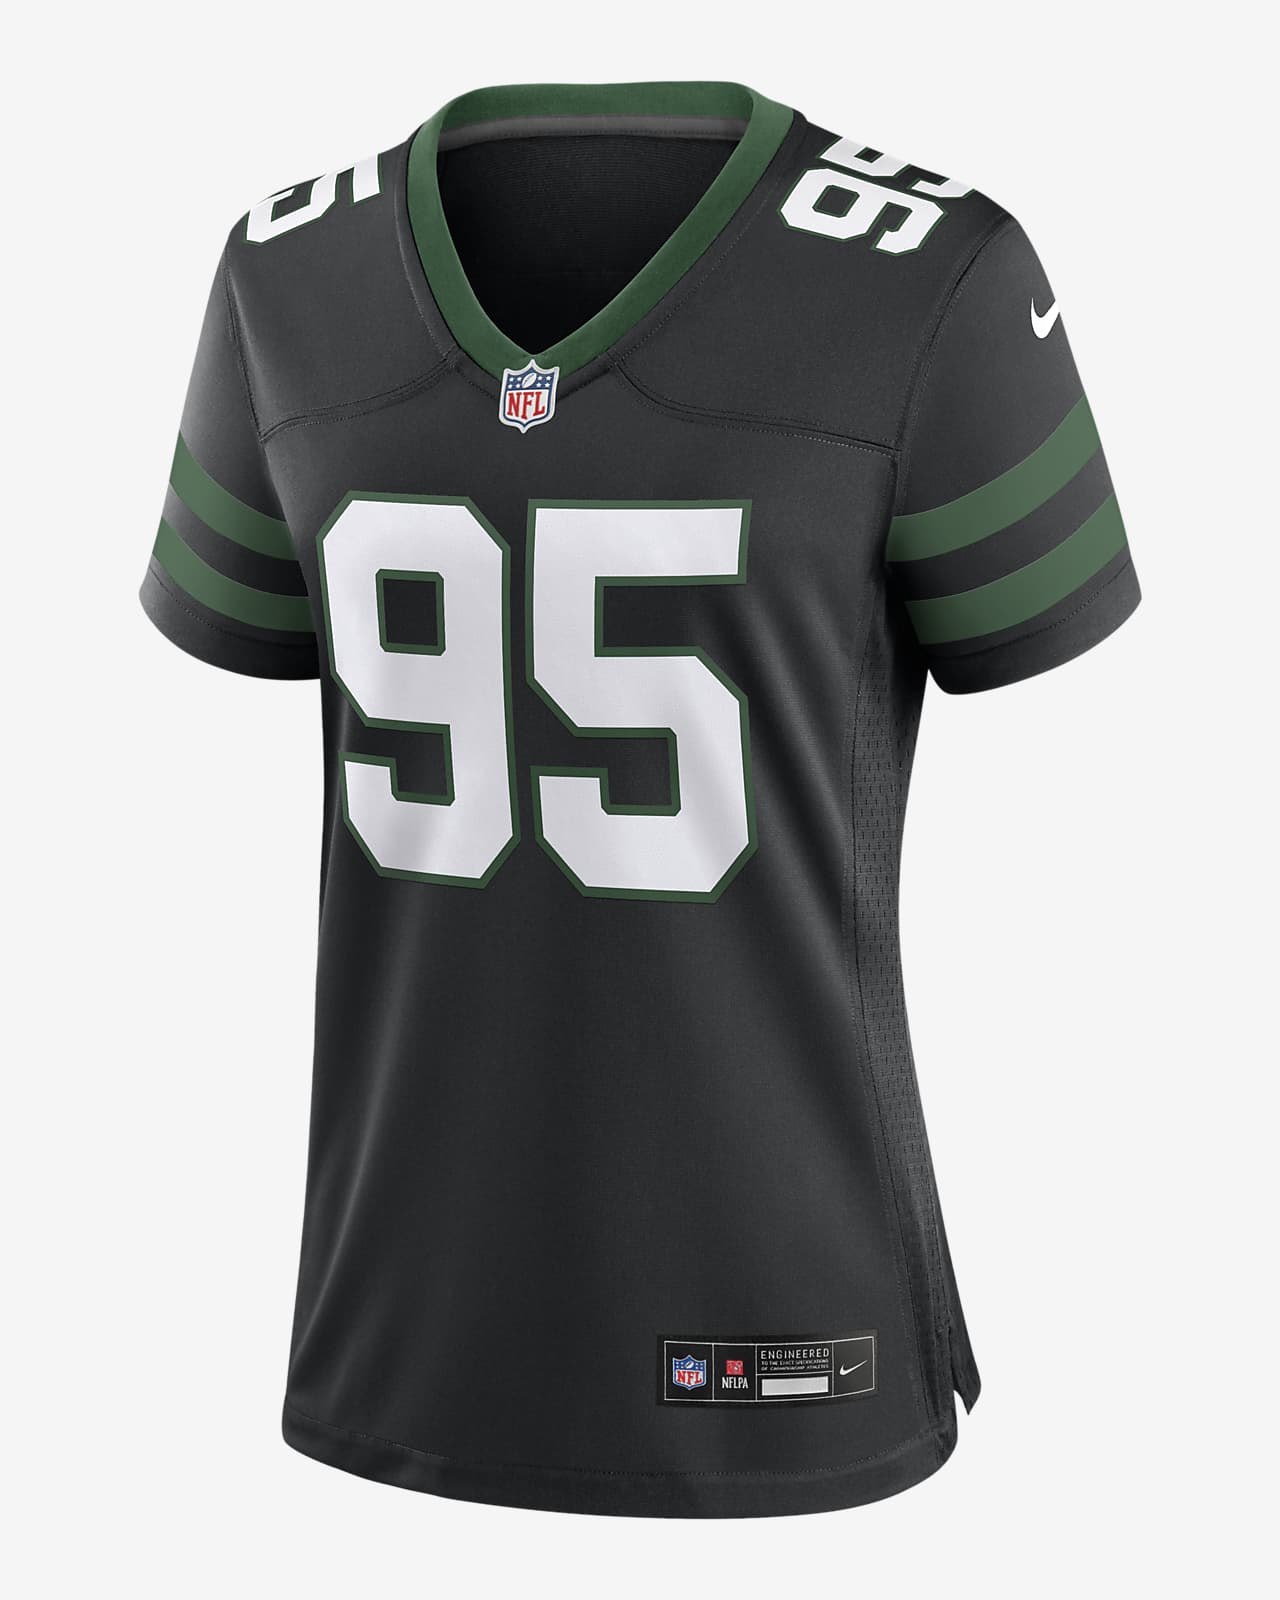 Quinnen Williams New York Jets Women's Nike NFL Game Football Jersey